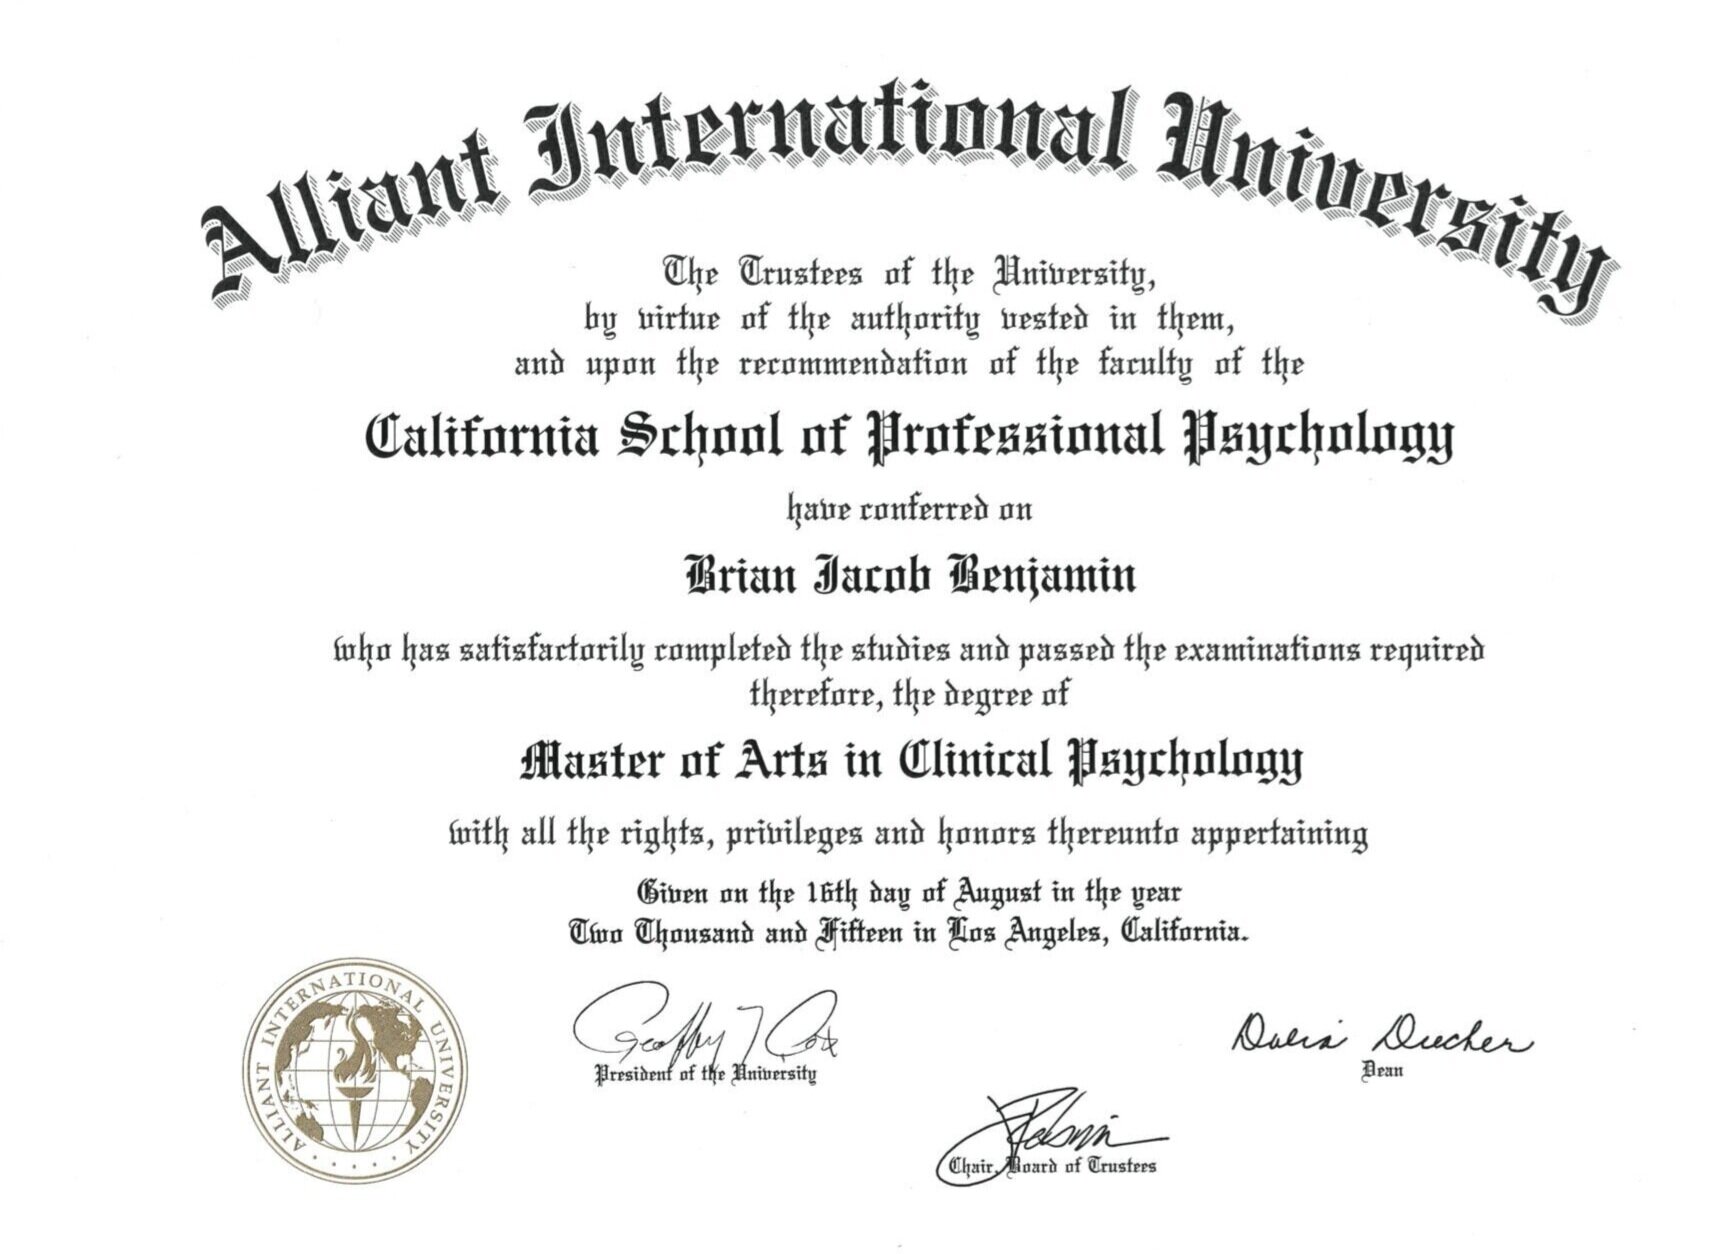 Masters in Clinical Psychology - Alliant International University, California School of Professional Psychology, Los Angeles